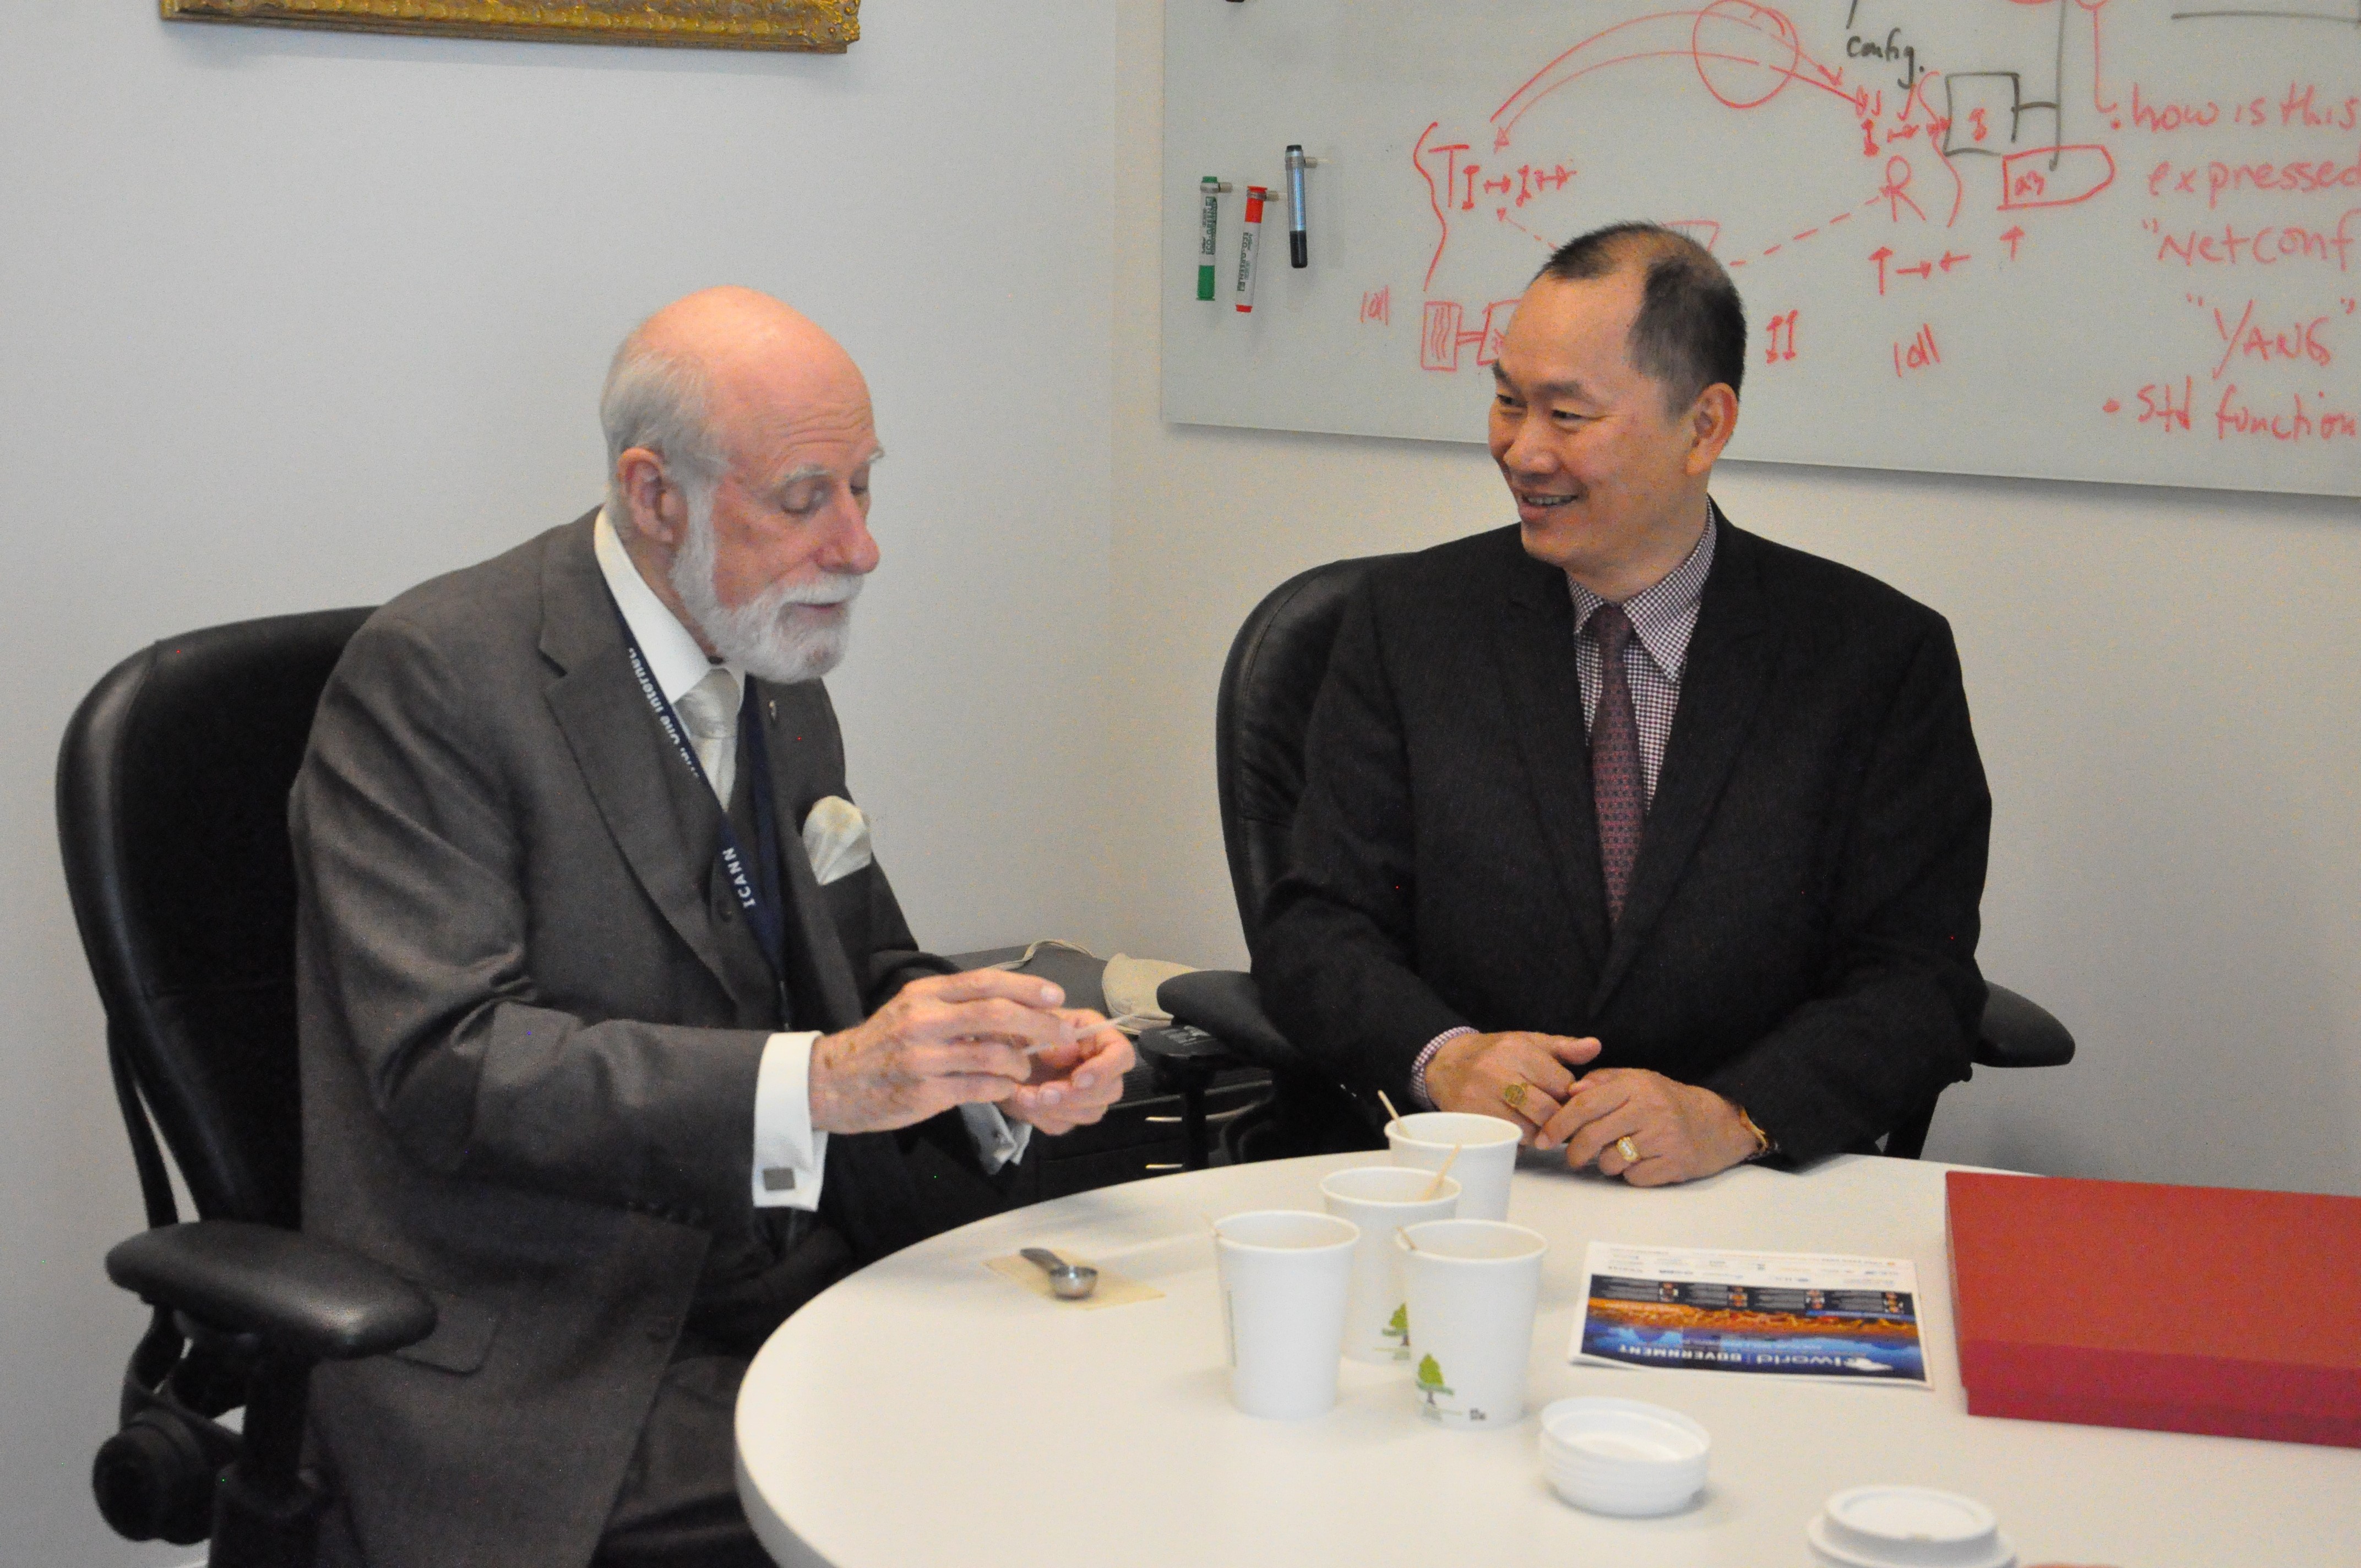 Wonderful meeting between the father of Internet, Vint Cerf, and Nguyen Anh Tuan